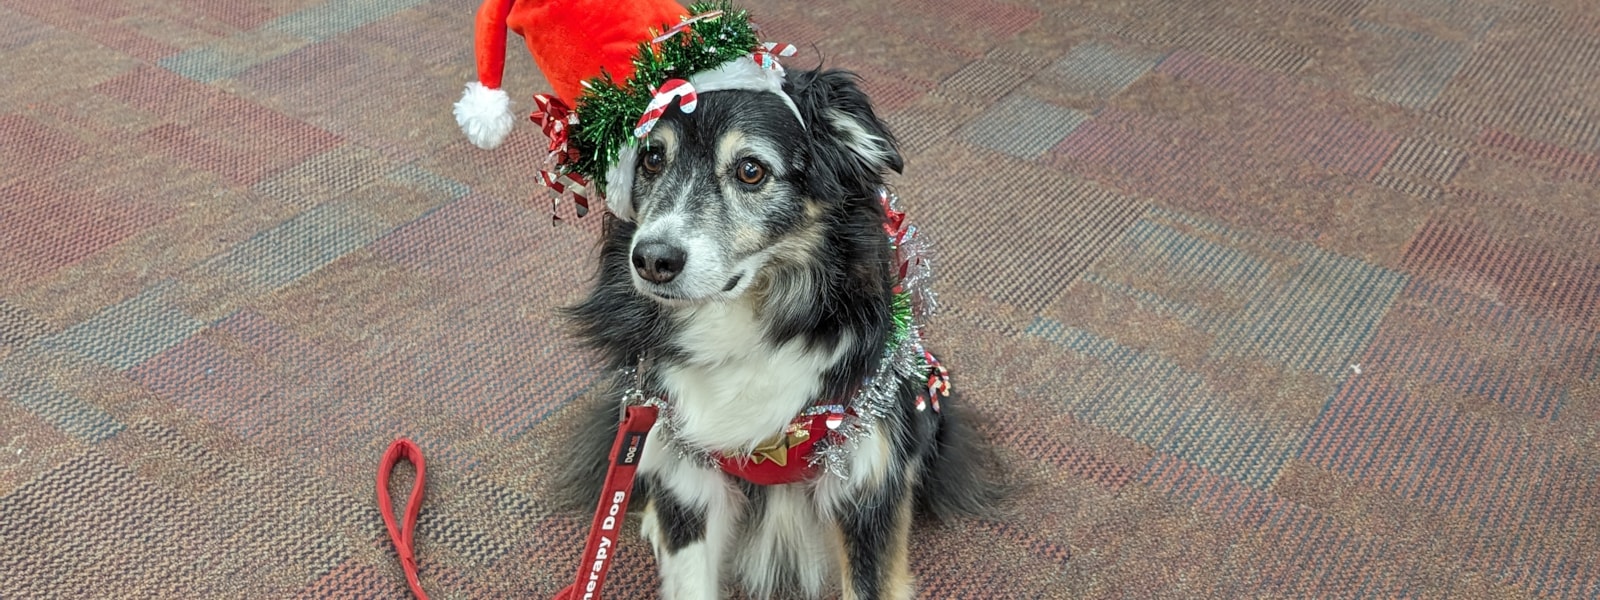 Therapy Dog with a Santa Hat and Holiday Sweater on.